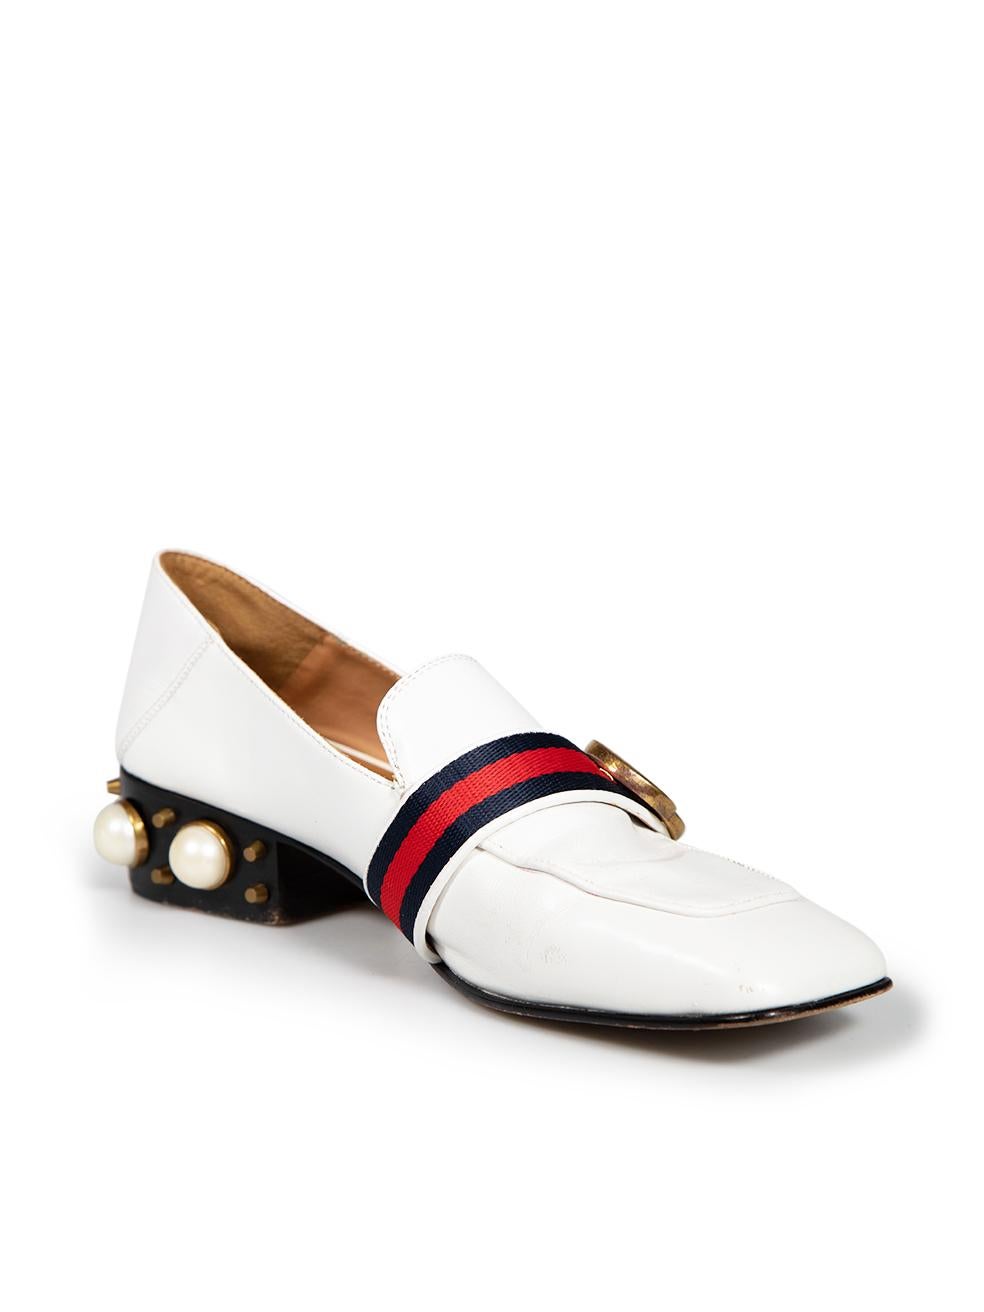 CONDITION is Good. General wear to loafers is evident. Moderate signs of scratches and abrasions to uppers and rear of both shoes. The GG logo on pearl is missing on the left shoe on this used Gucci designer resale item.
 
 
 
 Details
 
 
 White
 
